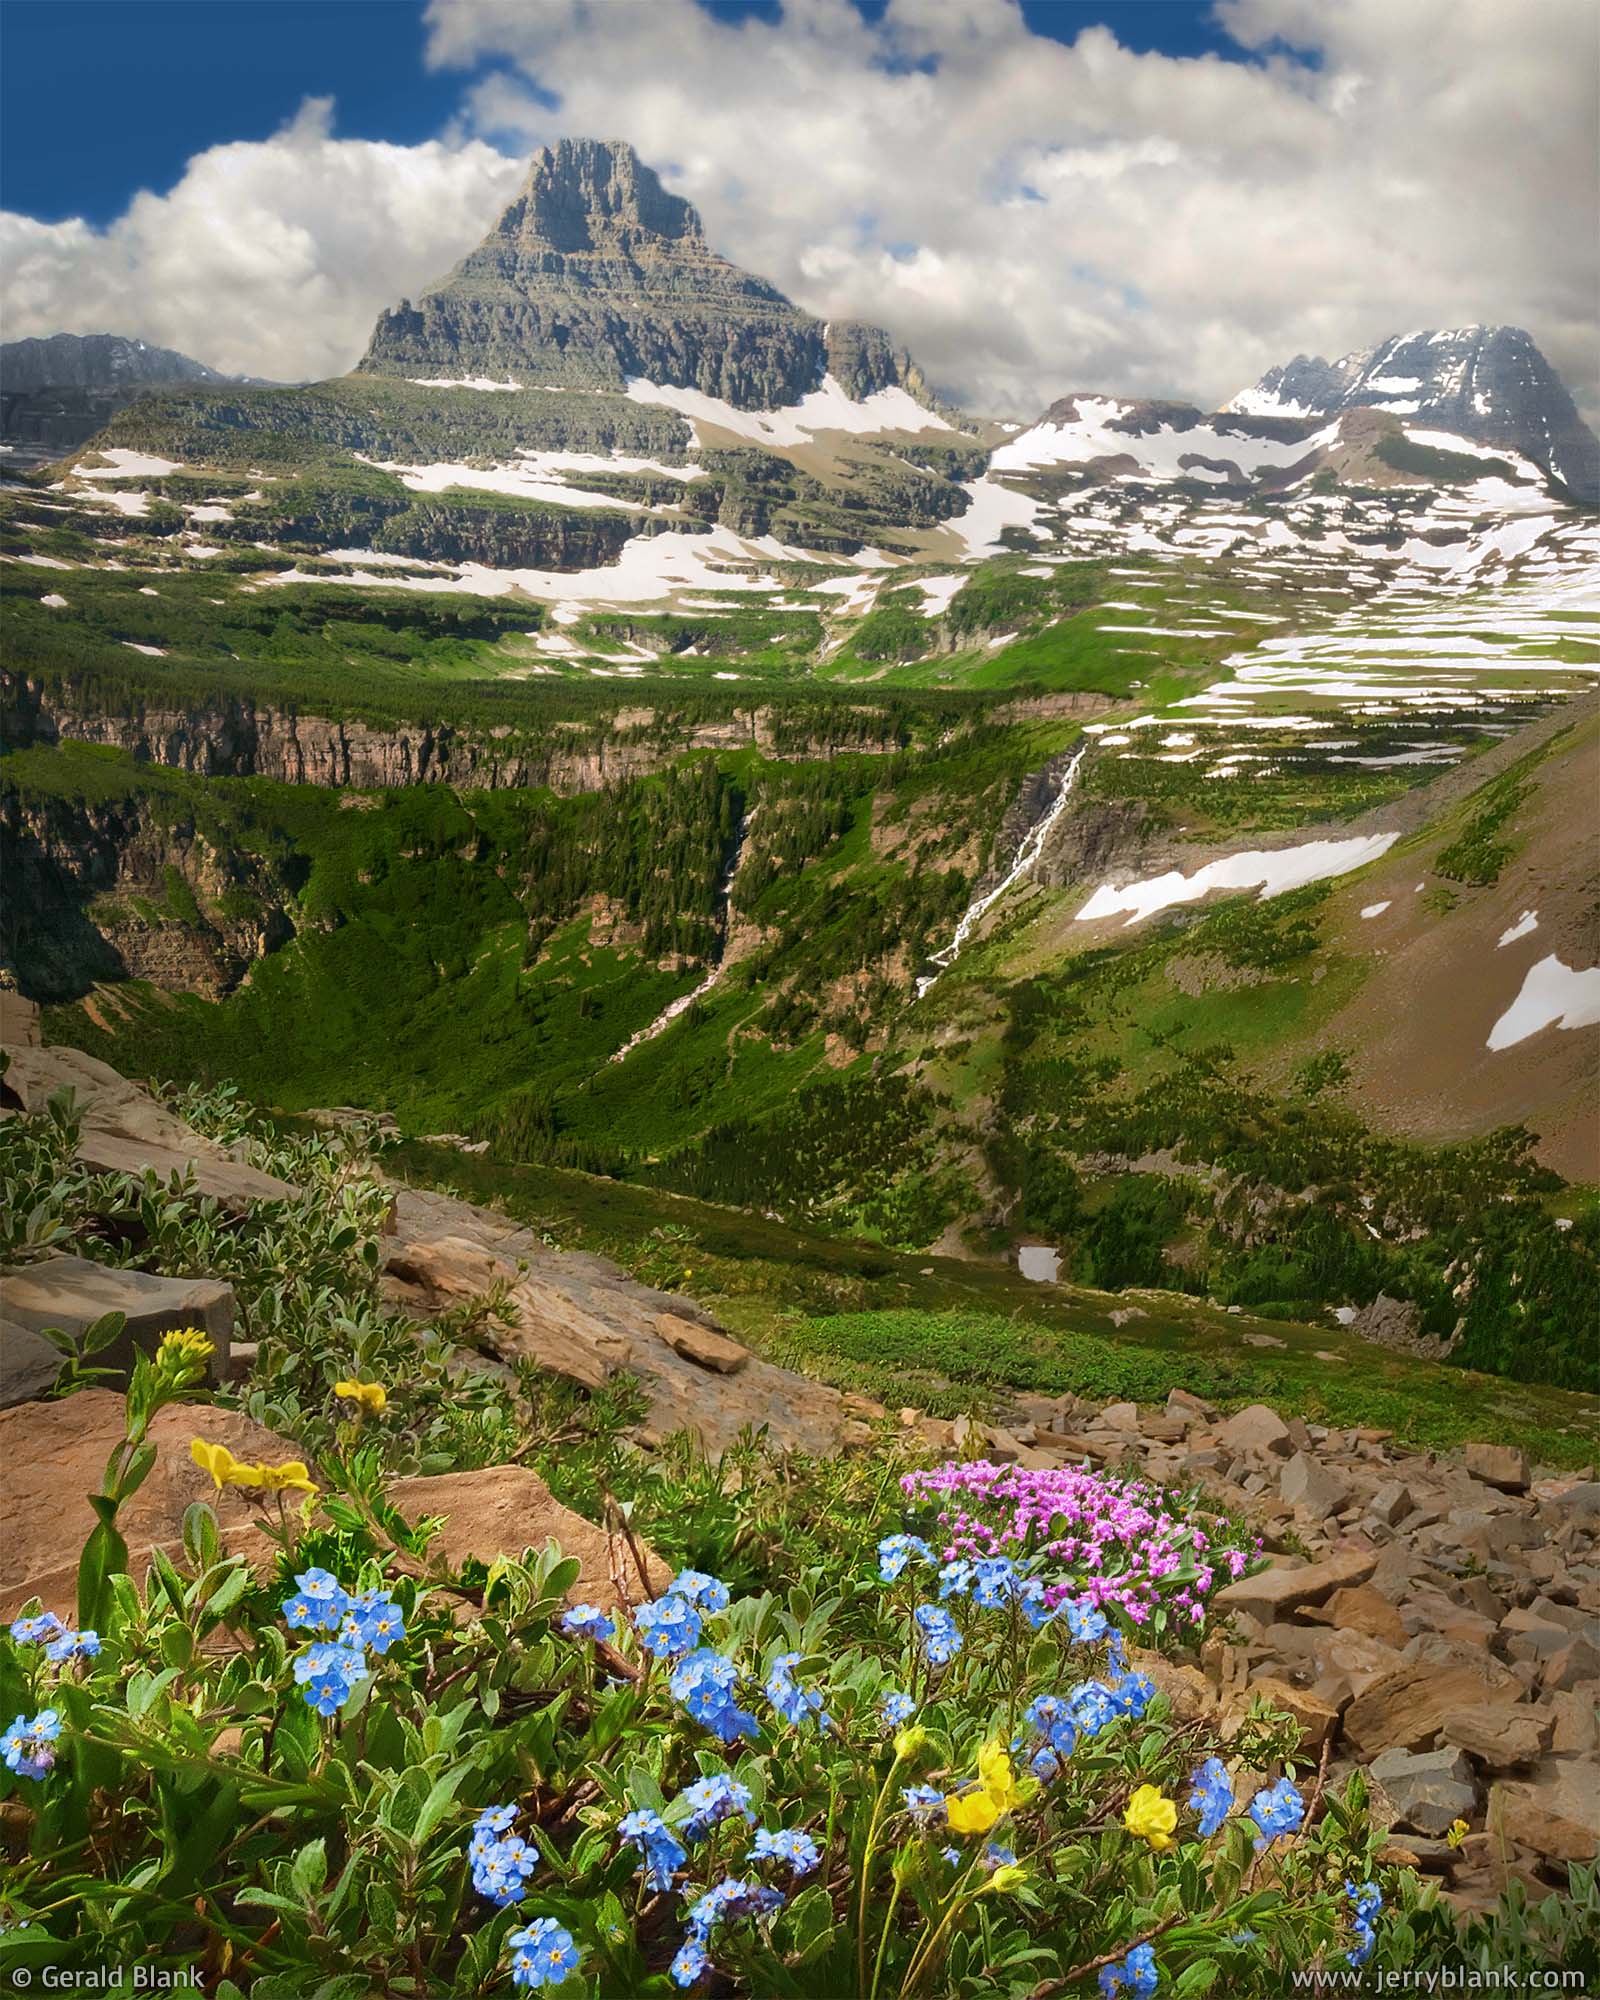 #00042 - In this view looking towards Reynolds Mountain in Glacier National Park, Montana, alpine wildflowers spring to life among the rocks on Piegan Mountain - photo by Jerry Blank